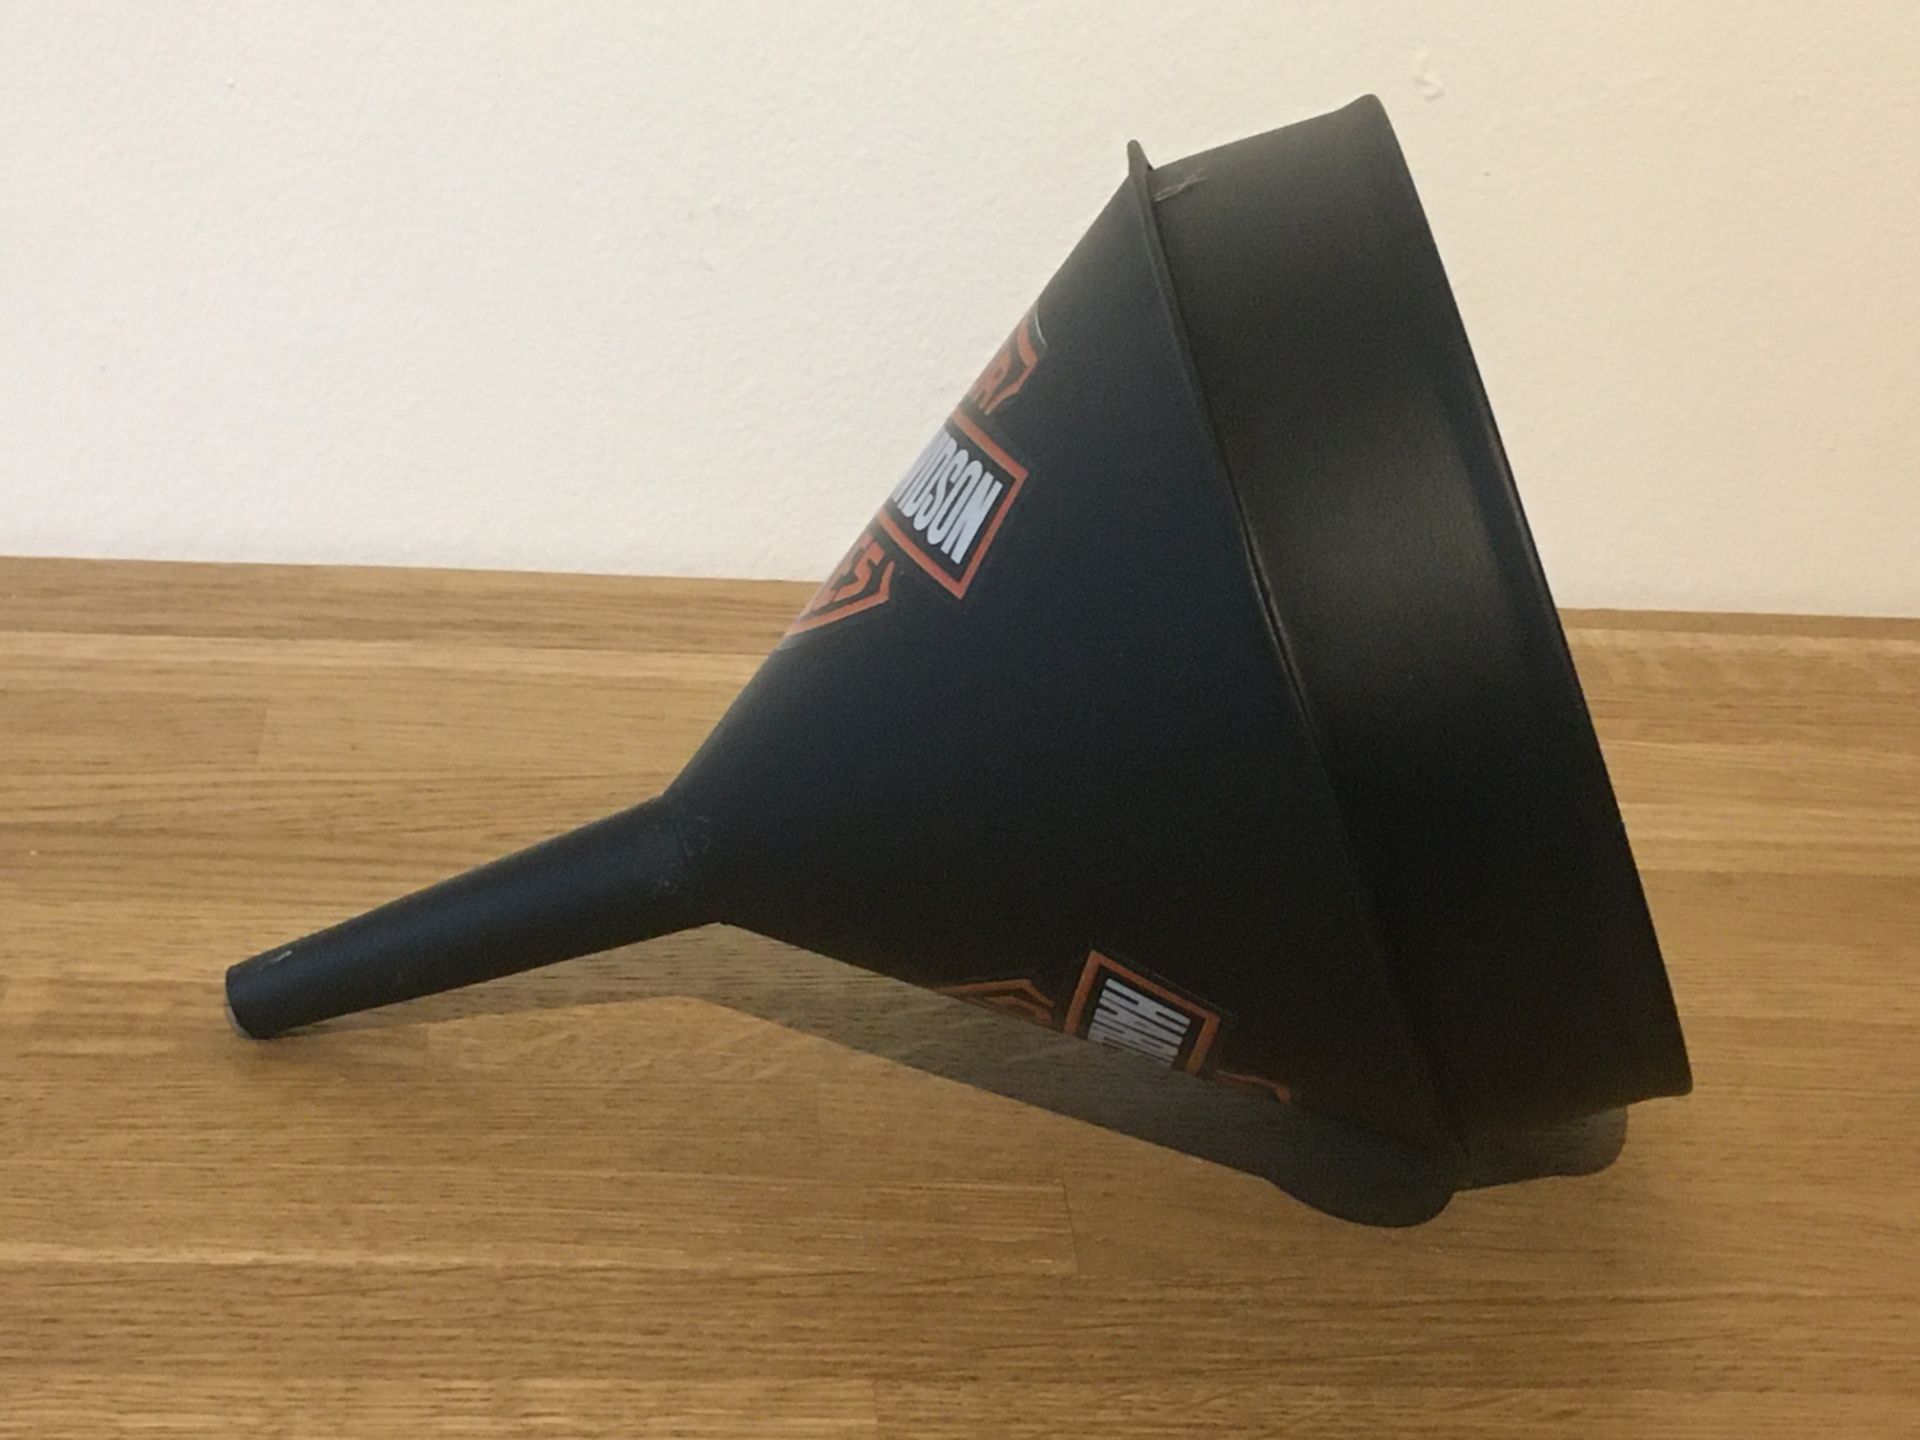 Small Harley Davidson Motorcycles Oil Funnel - Image 5 of 5